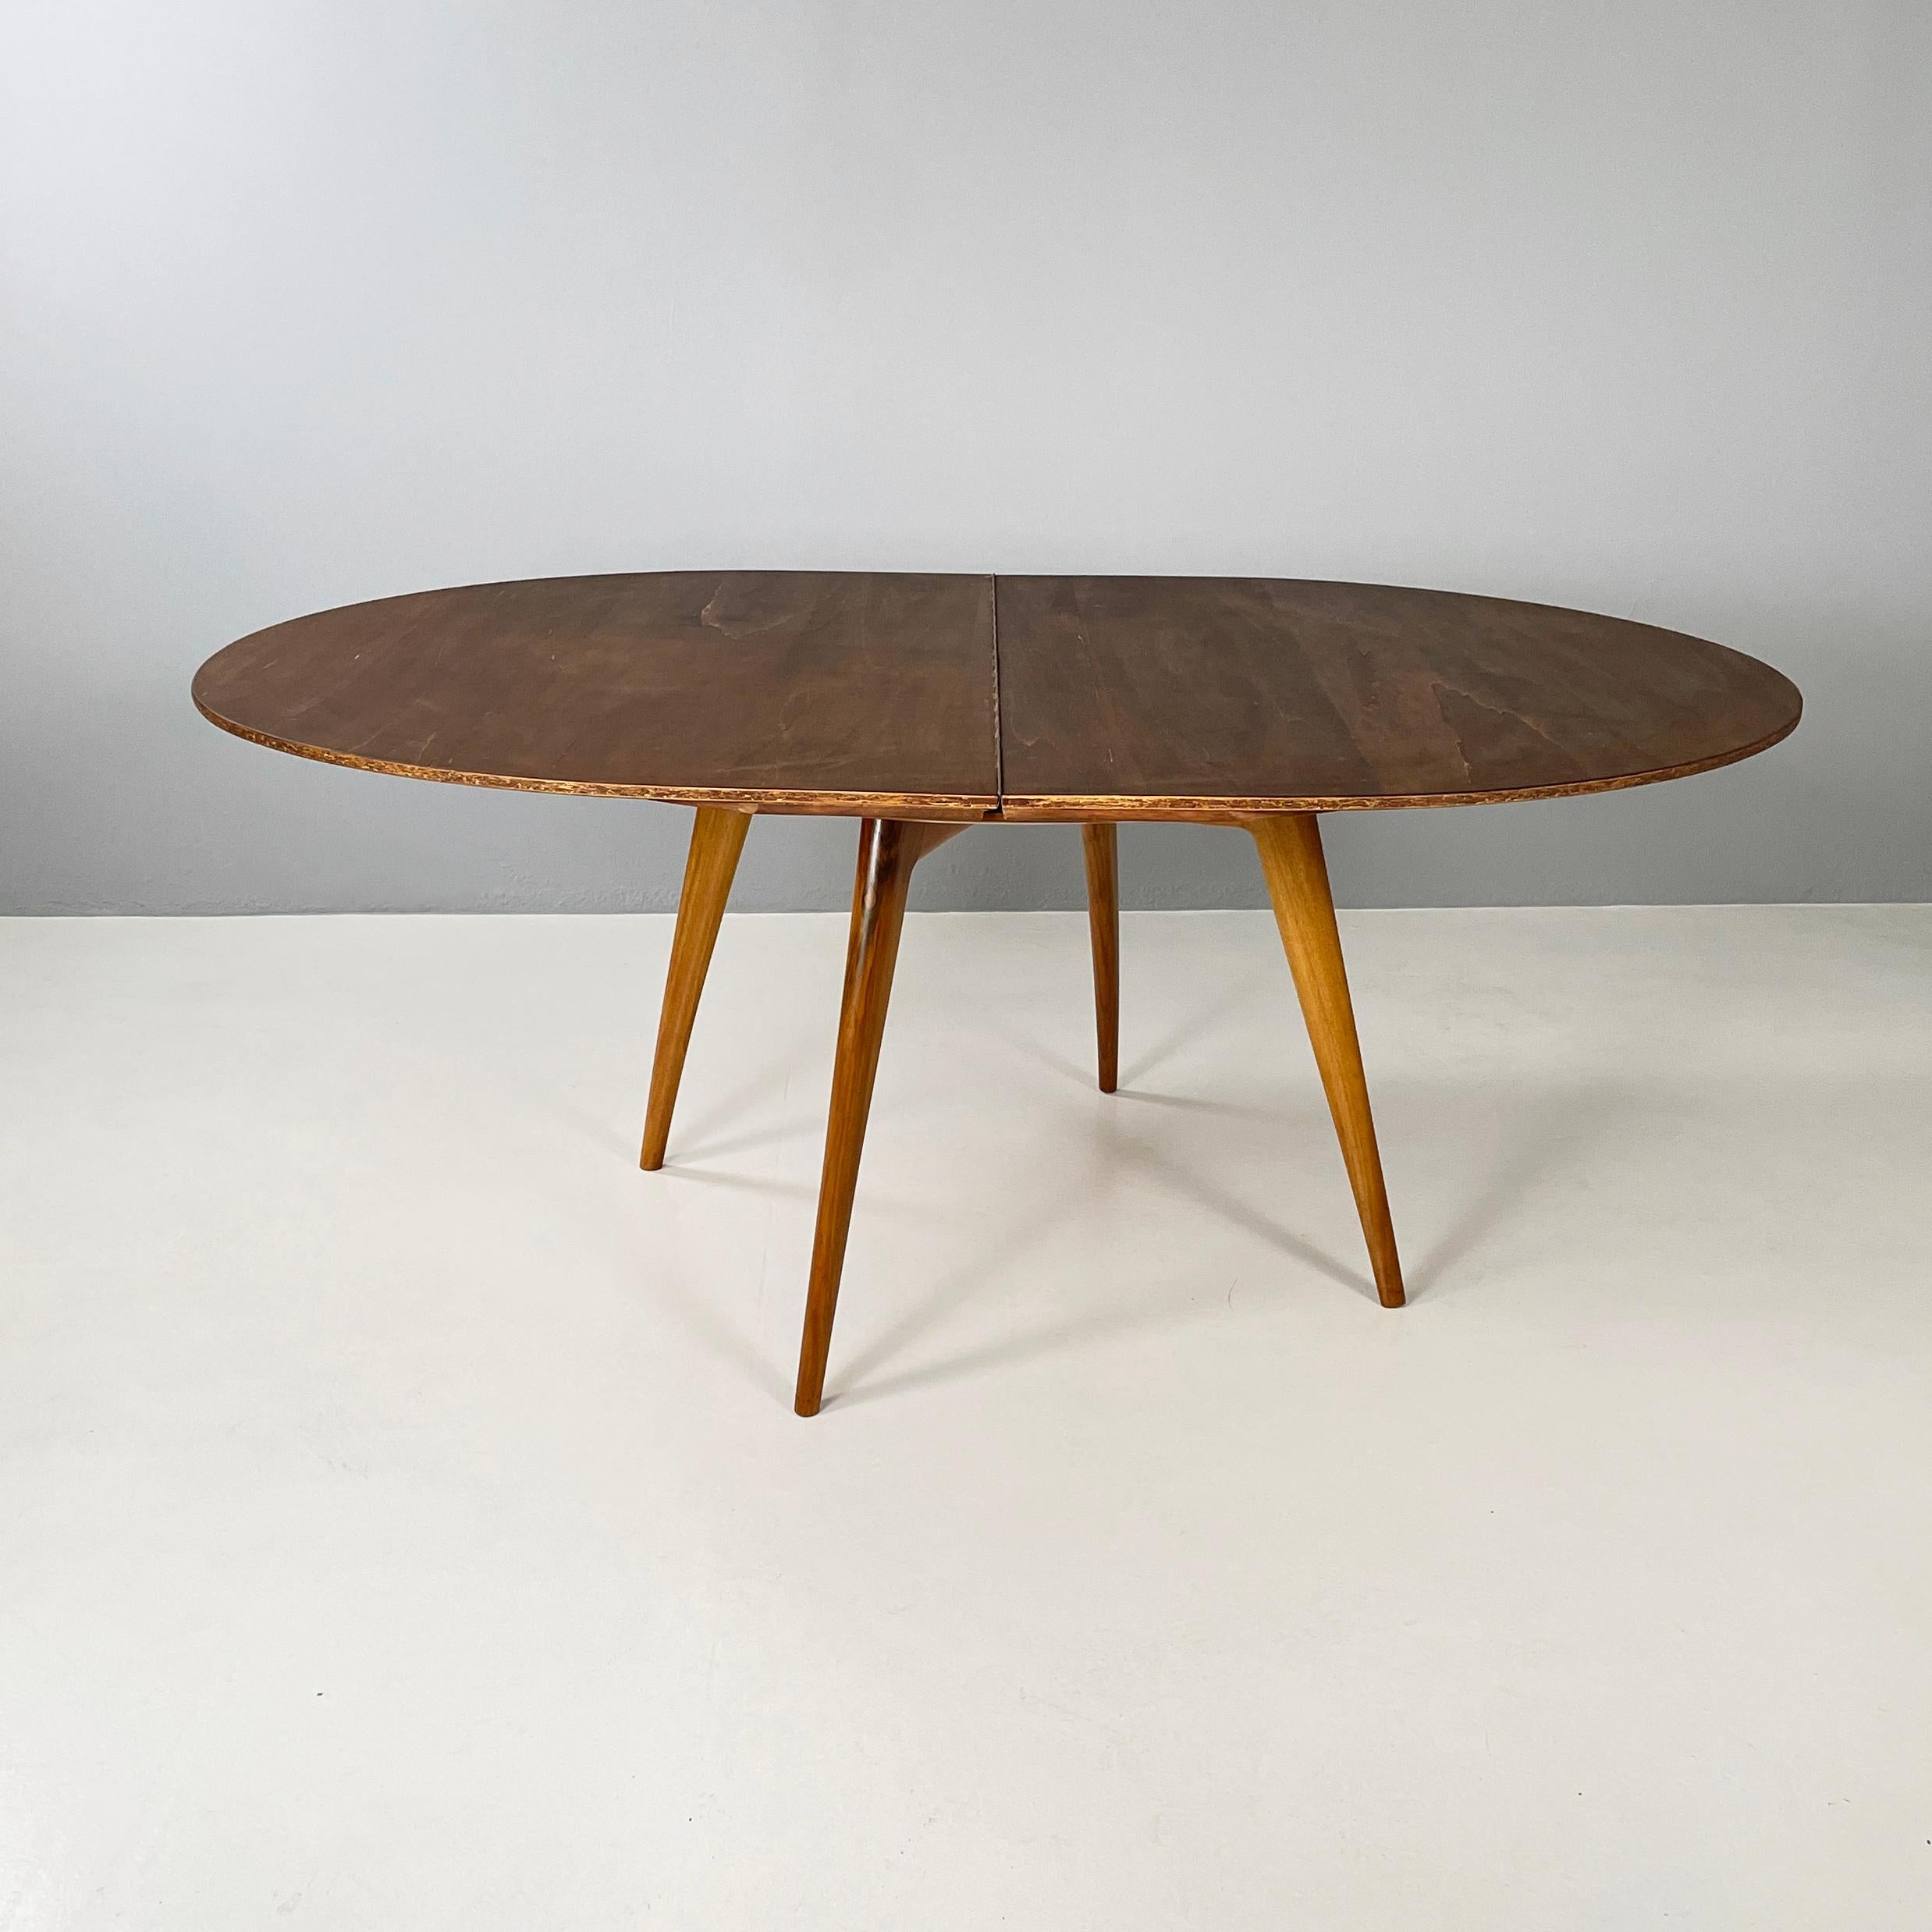 Italian mid-century modern Wooden dining table with extension, 1960s
Dining table entirely in wood. The top can be round or, using the extension, oval. Round section legs.
1960 approx.
Good condition, the extension shows signs of use. the round top